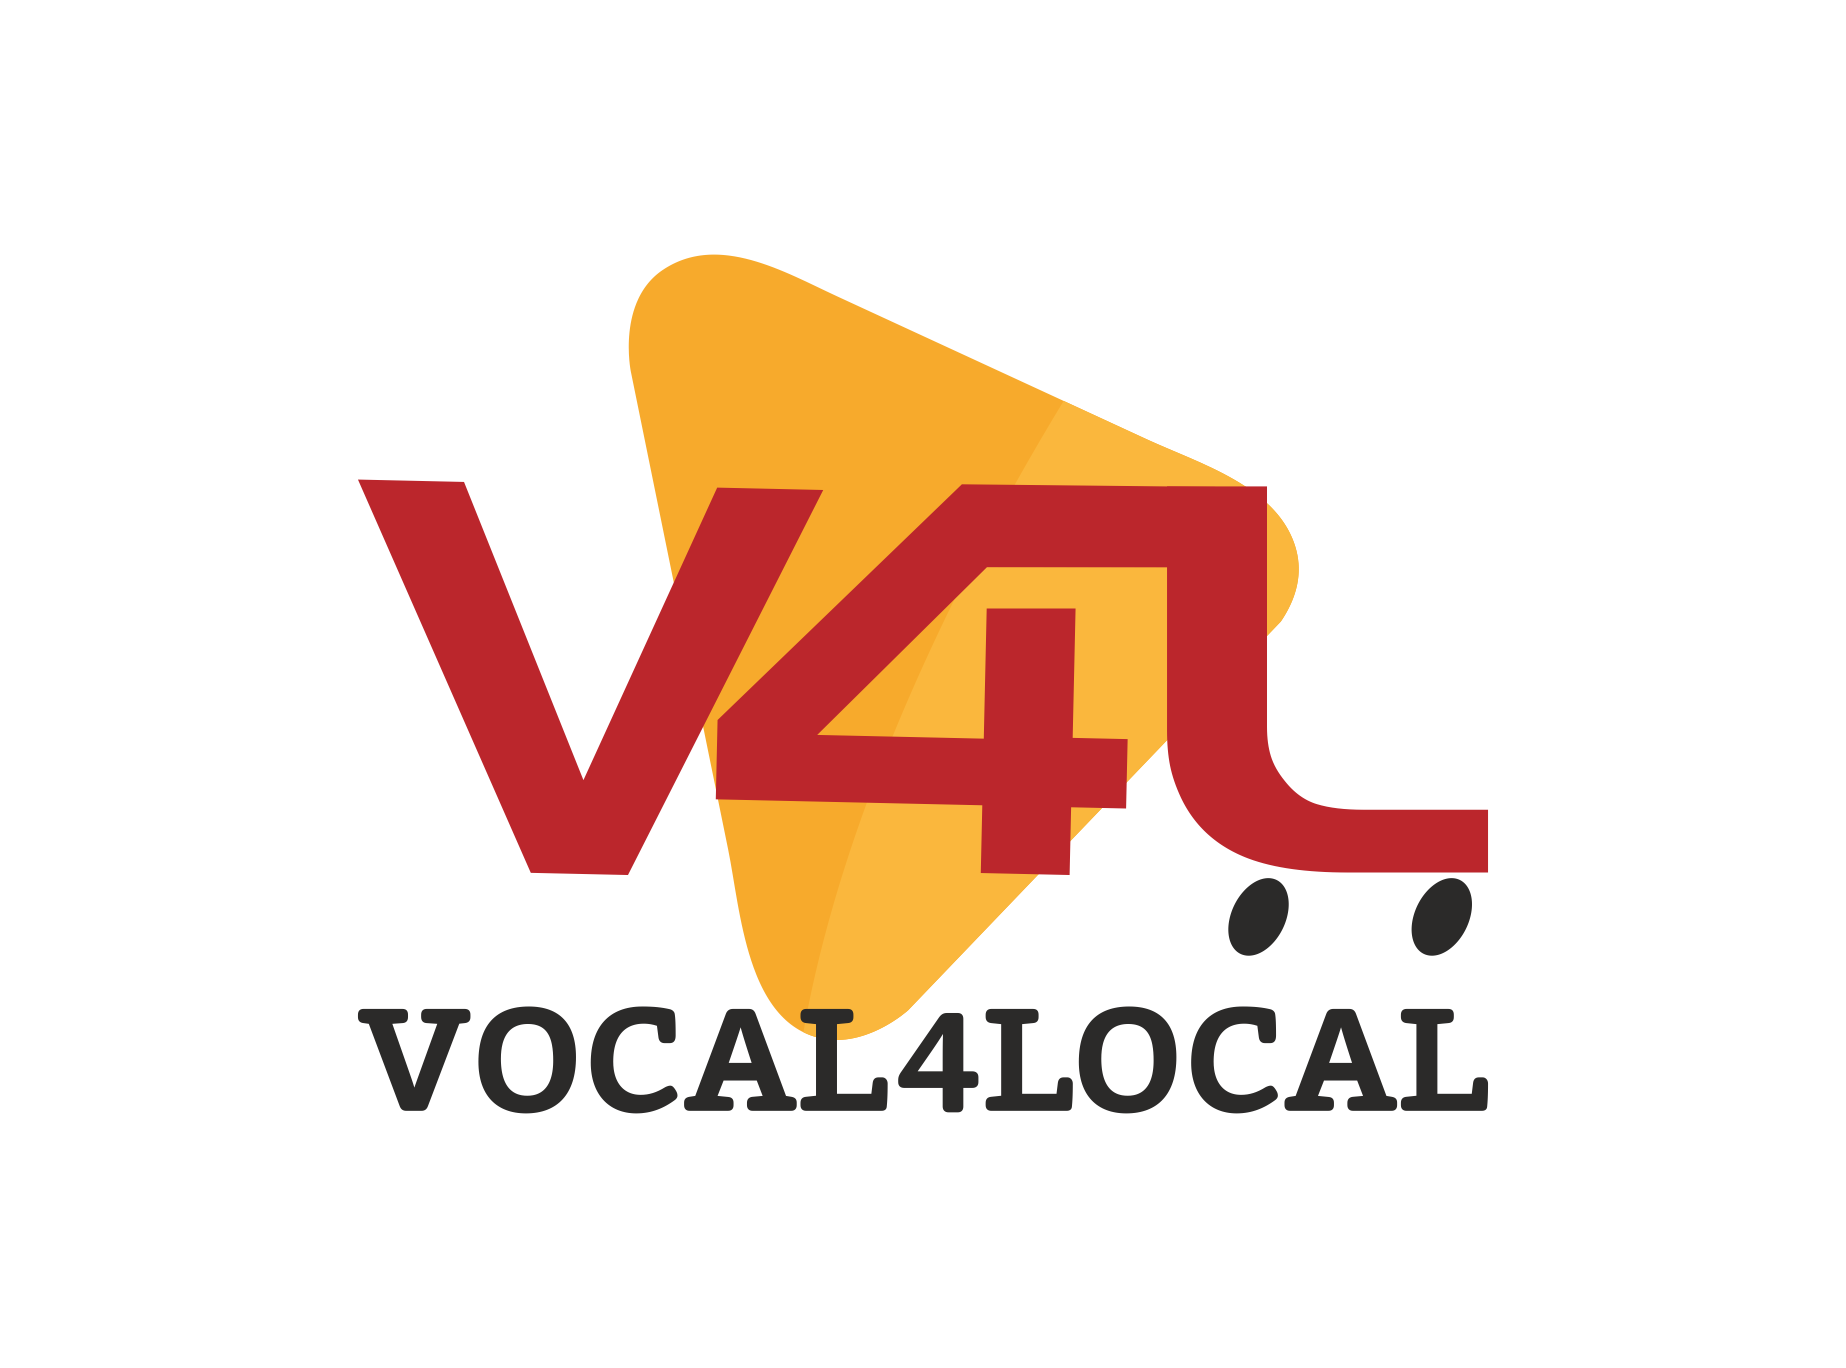 PHPStore - Be Vocal for Local - Digital India